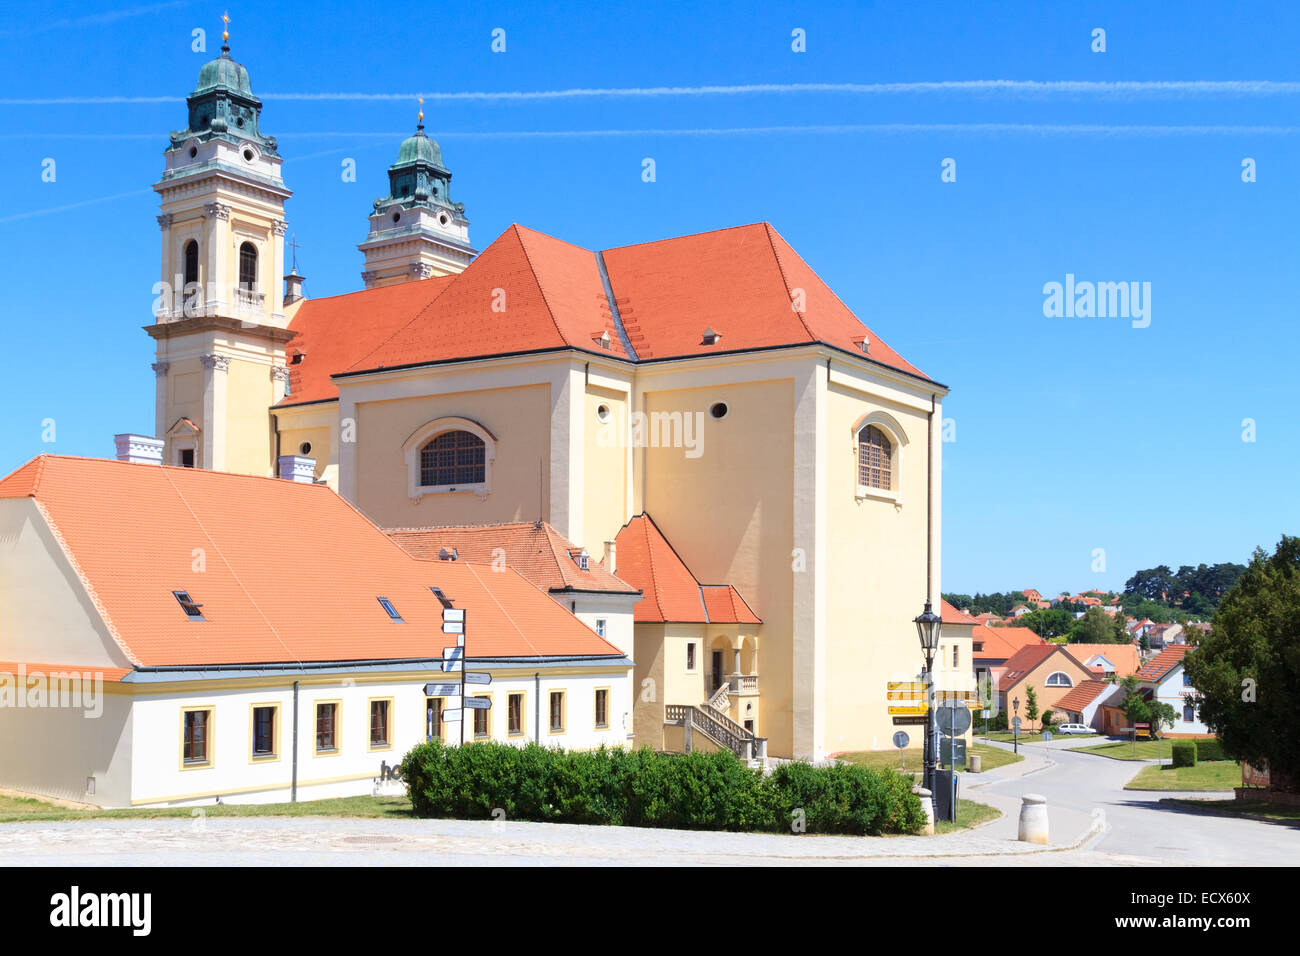 A church next to the famous castle in Valtice, Czech Republic Stock Photo